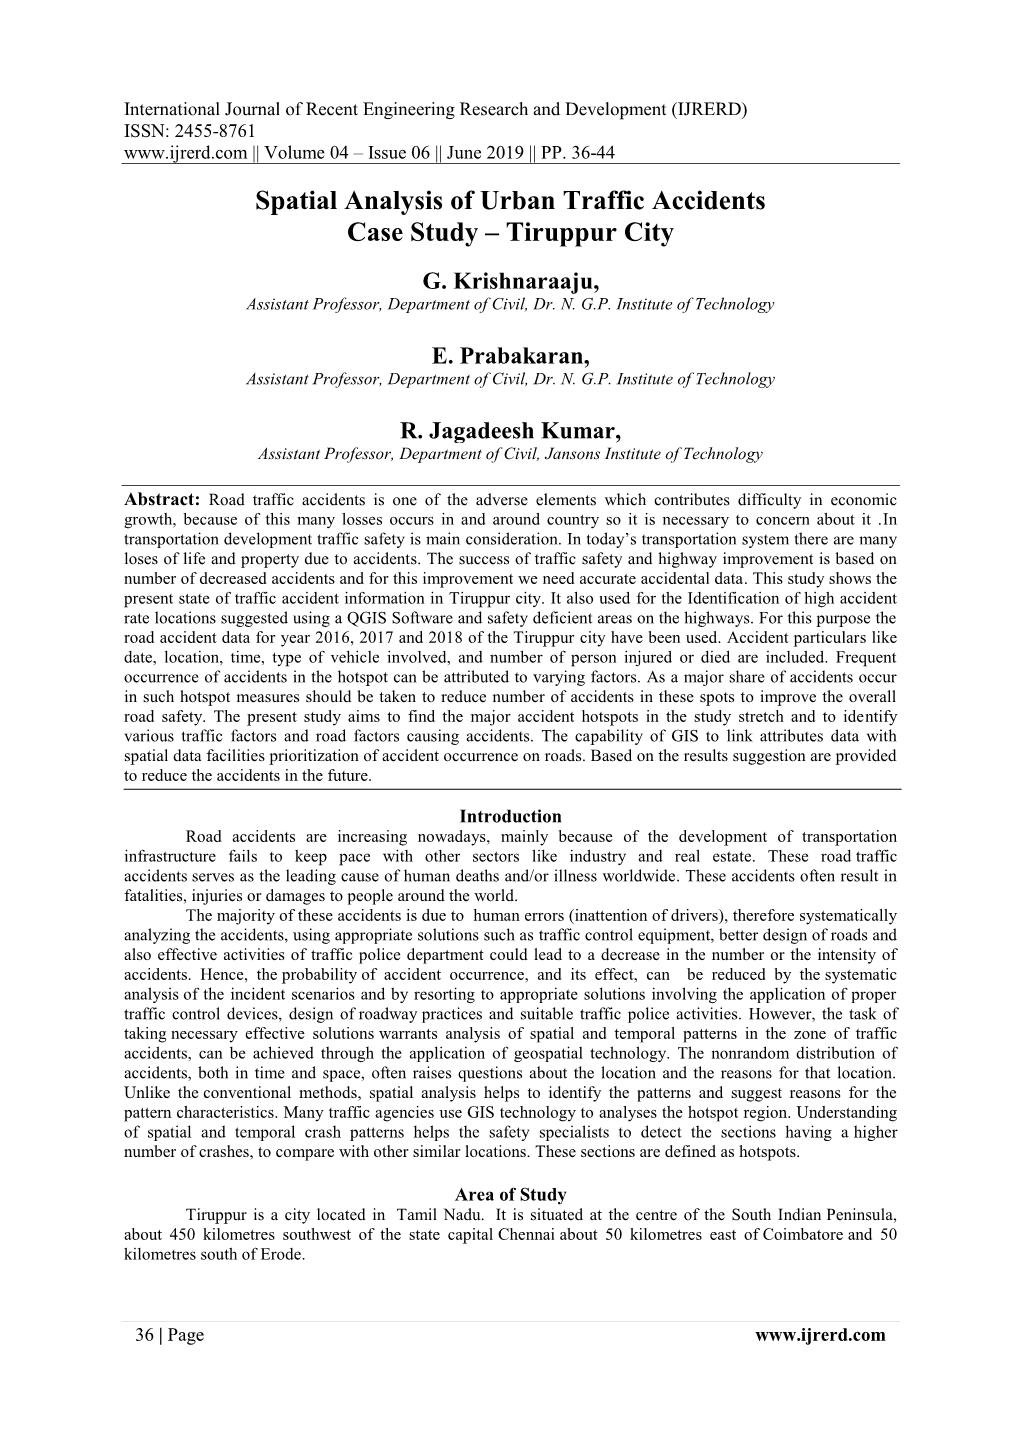 Spatial Analysis of Urban Traffic Accidents Case Study – Tiruppur City